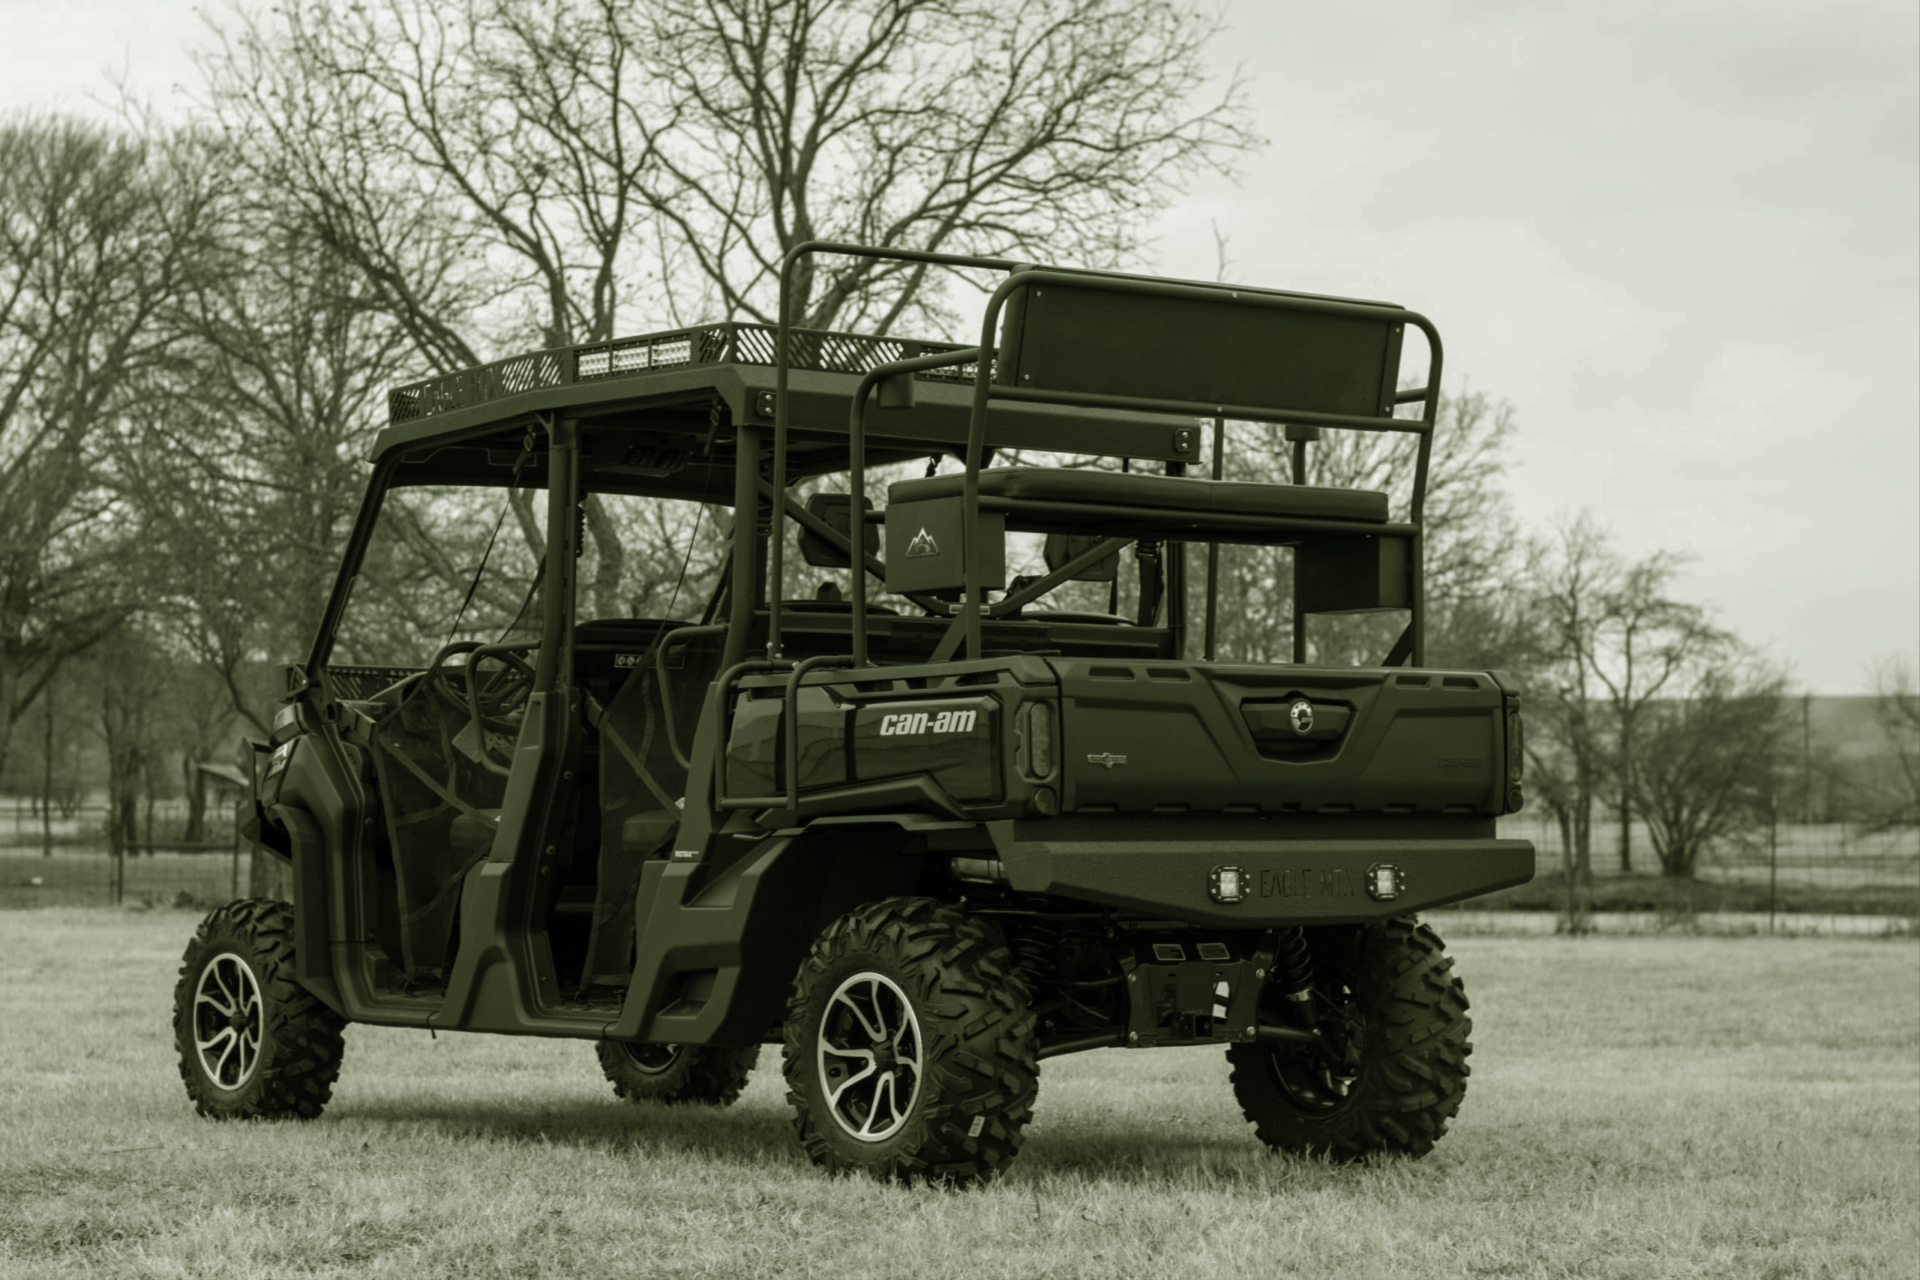 Eagle MTX - UTV Accessories - Bumpers, High Seats, Roofs, Hood Baskets, and More!